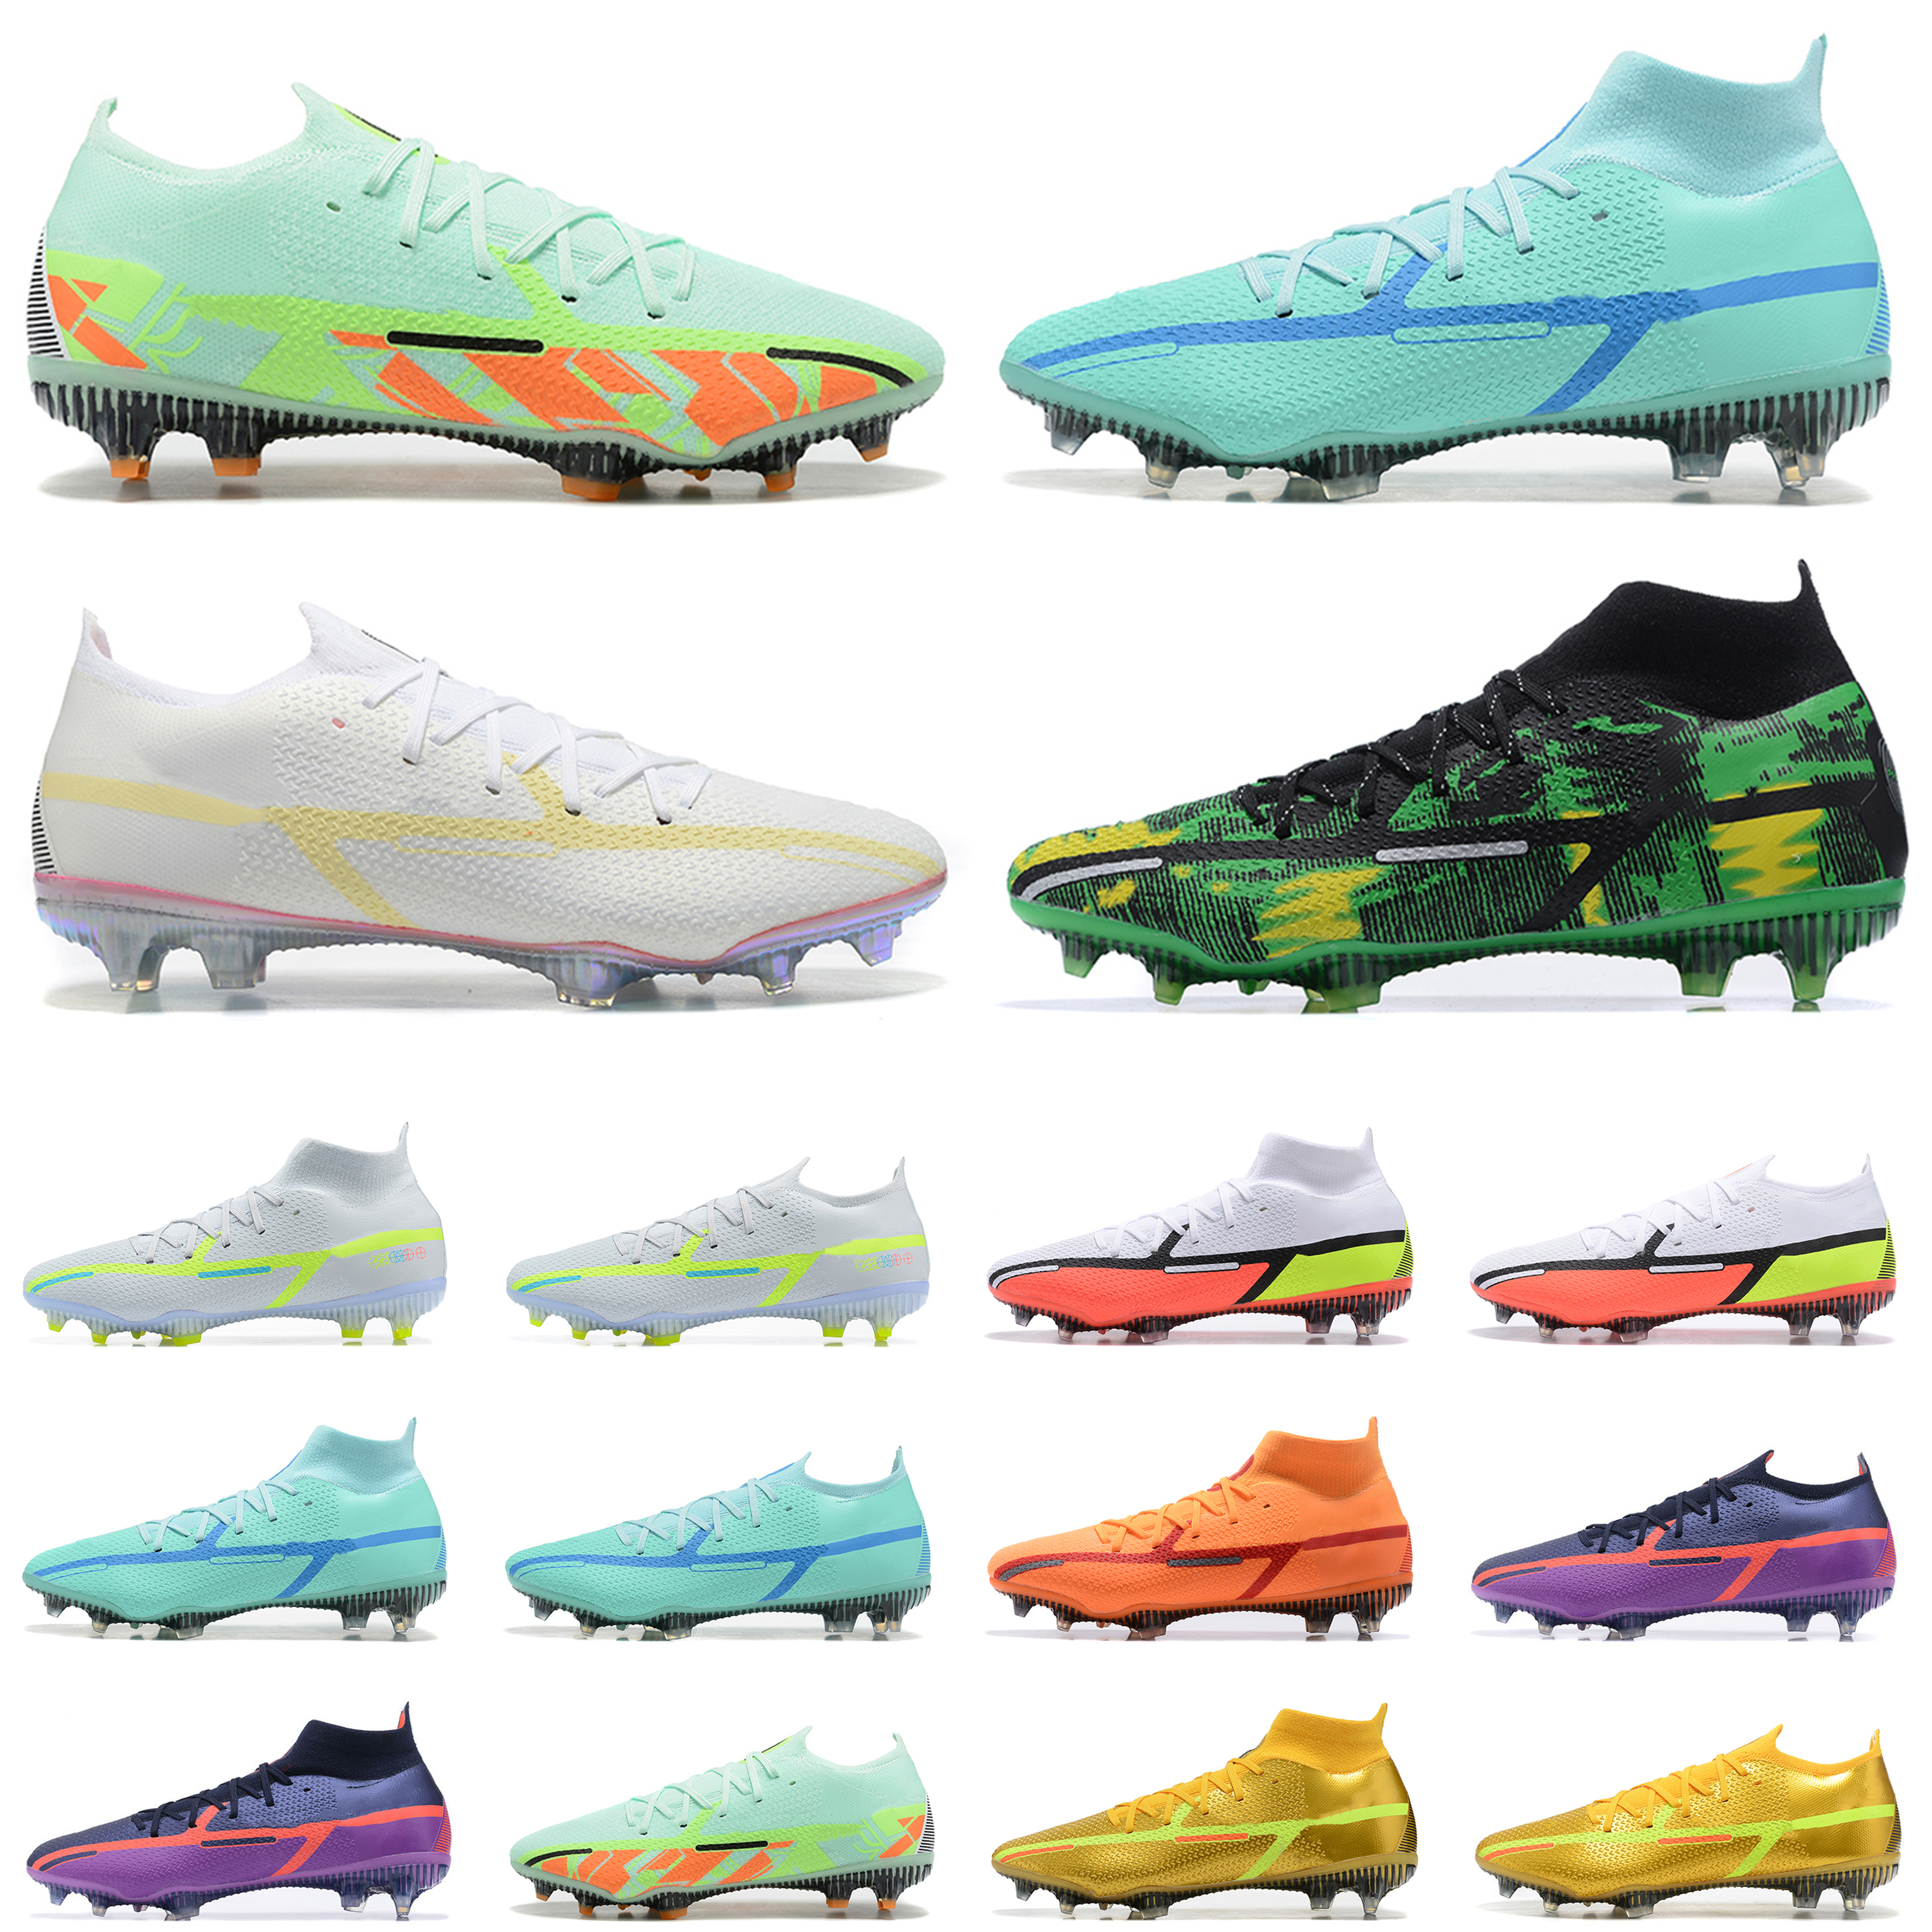 Image of soccer cleats man shoes Phantom GT2 Dynamic Fit DF Elite FG Firm Ground Cleat Vivid Purple Golden White Bright Crimson Football Sneakers men